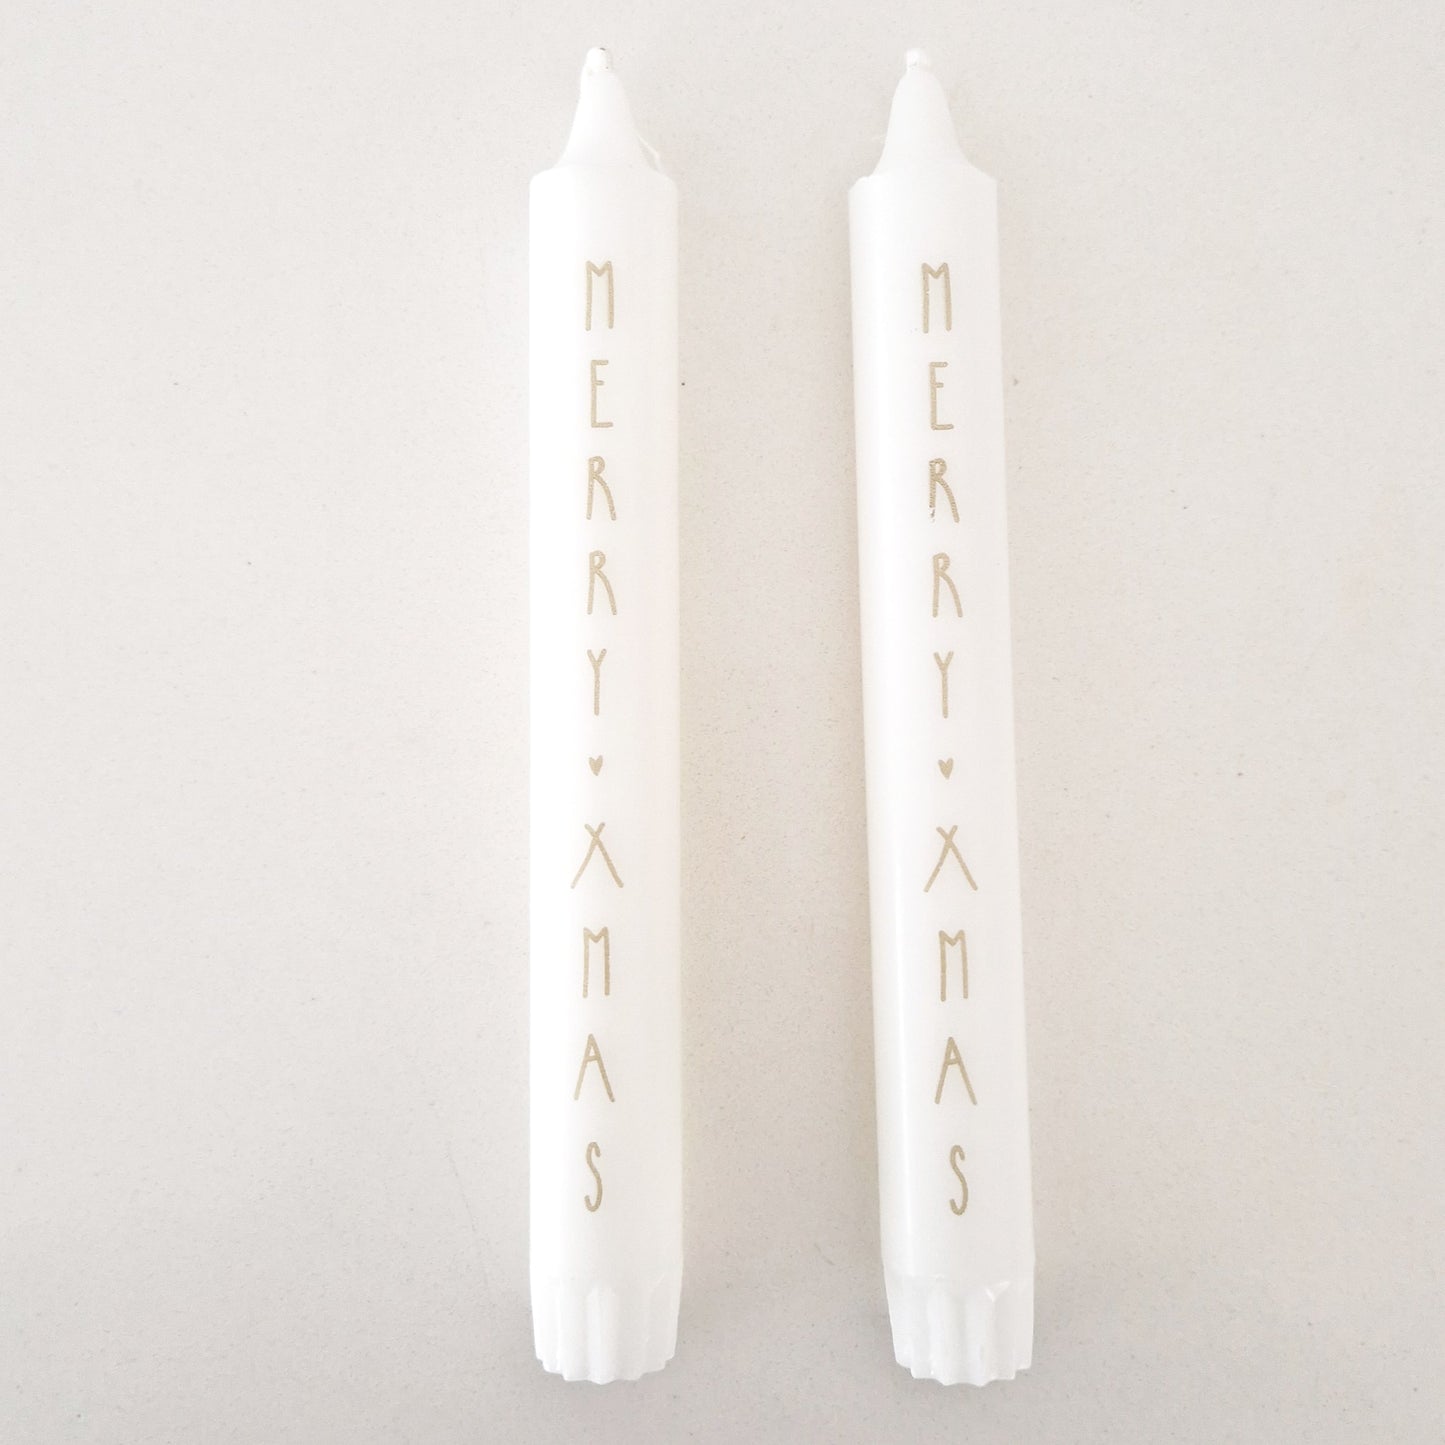 Dinner candle Merry X-mas set of 2